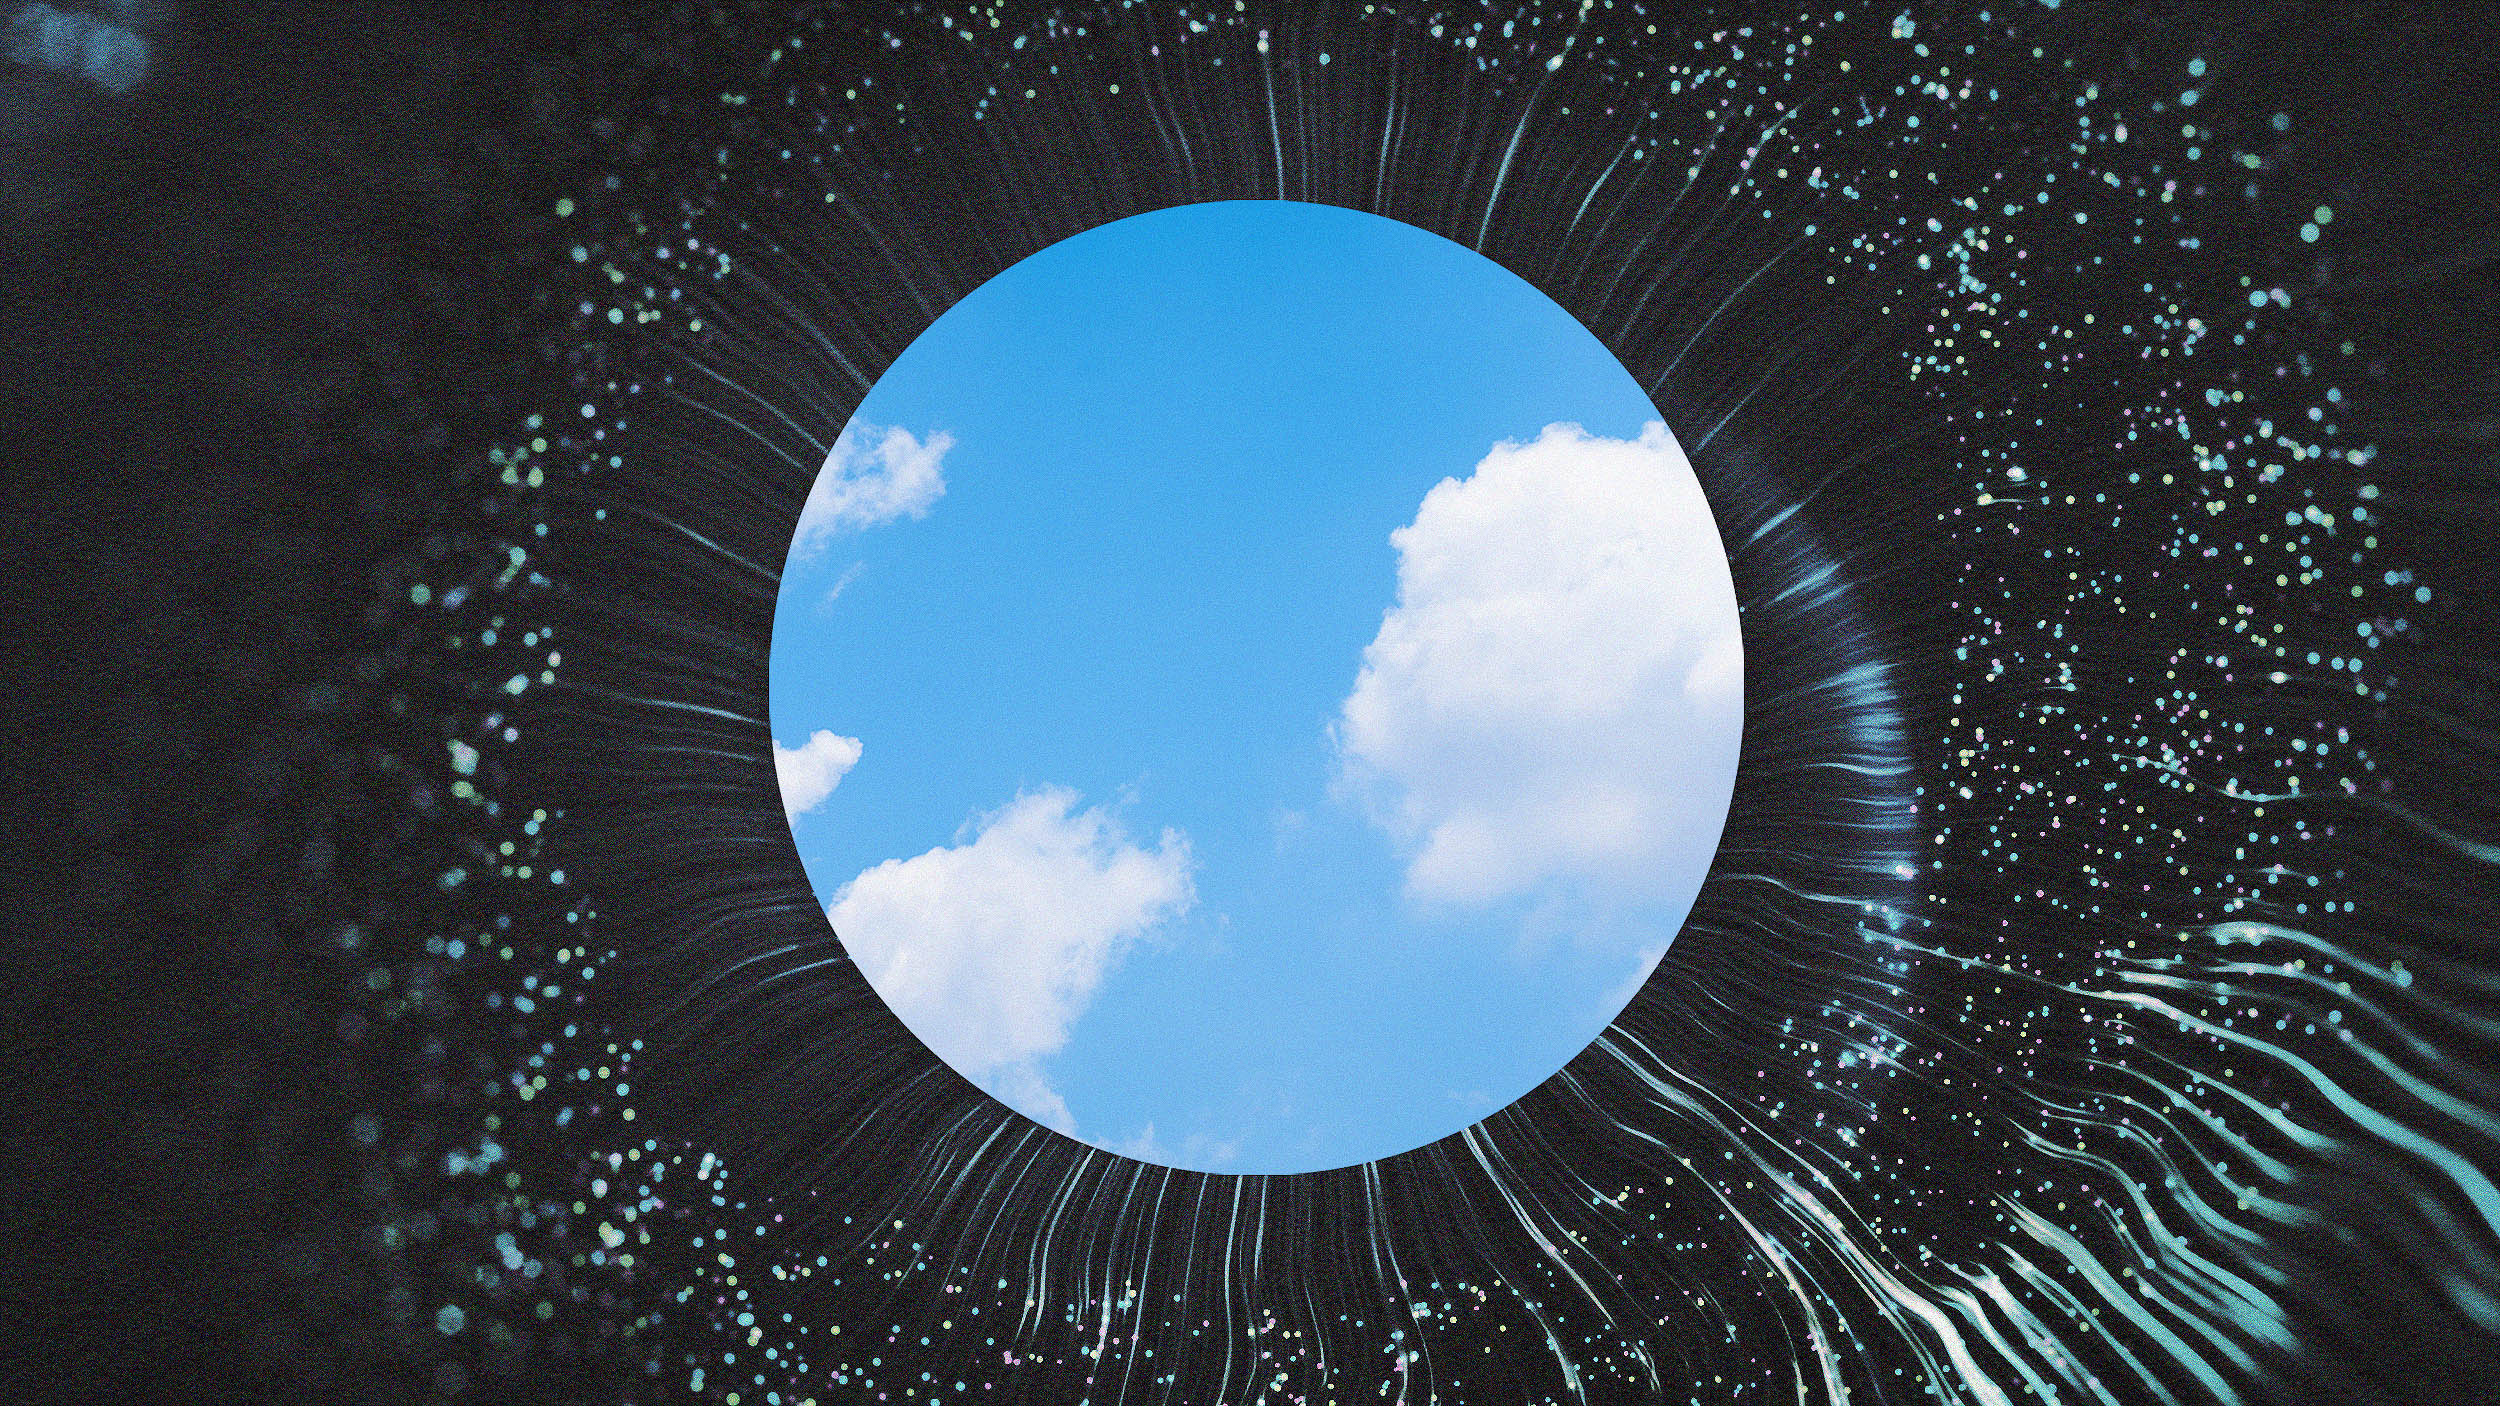 A digital graphic featuring a vibrant blue circle showcasing a clear sky with clouds, surrounded by radiating white lines and particles on a dark background.